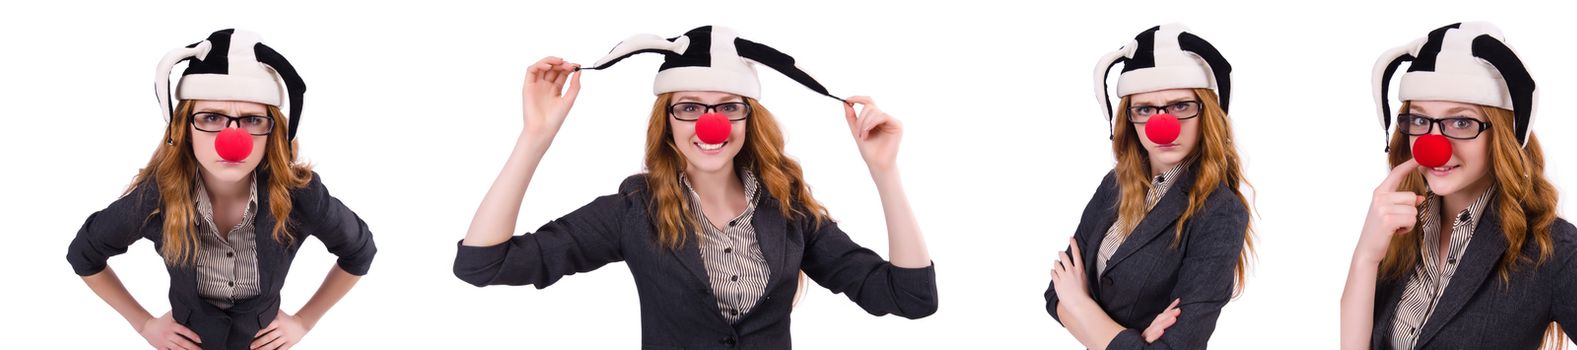 Funny woman clown isolated on the white